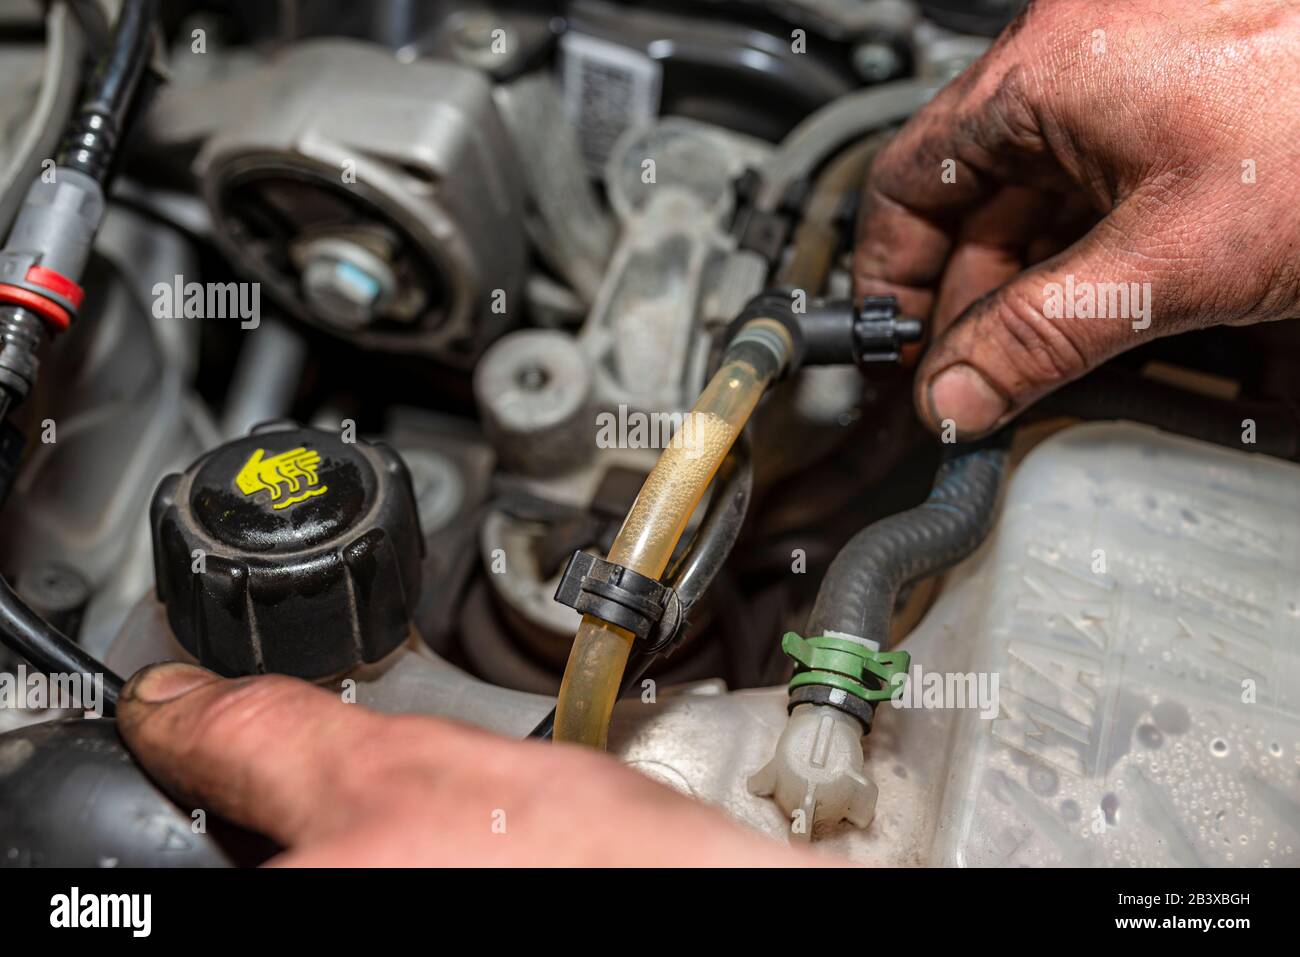 The mechanic bleeds the fuel system with a pump that is on the fuel line, after installing a new fuel filter, the man hands are visible. Stock Photo